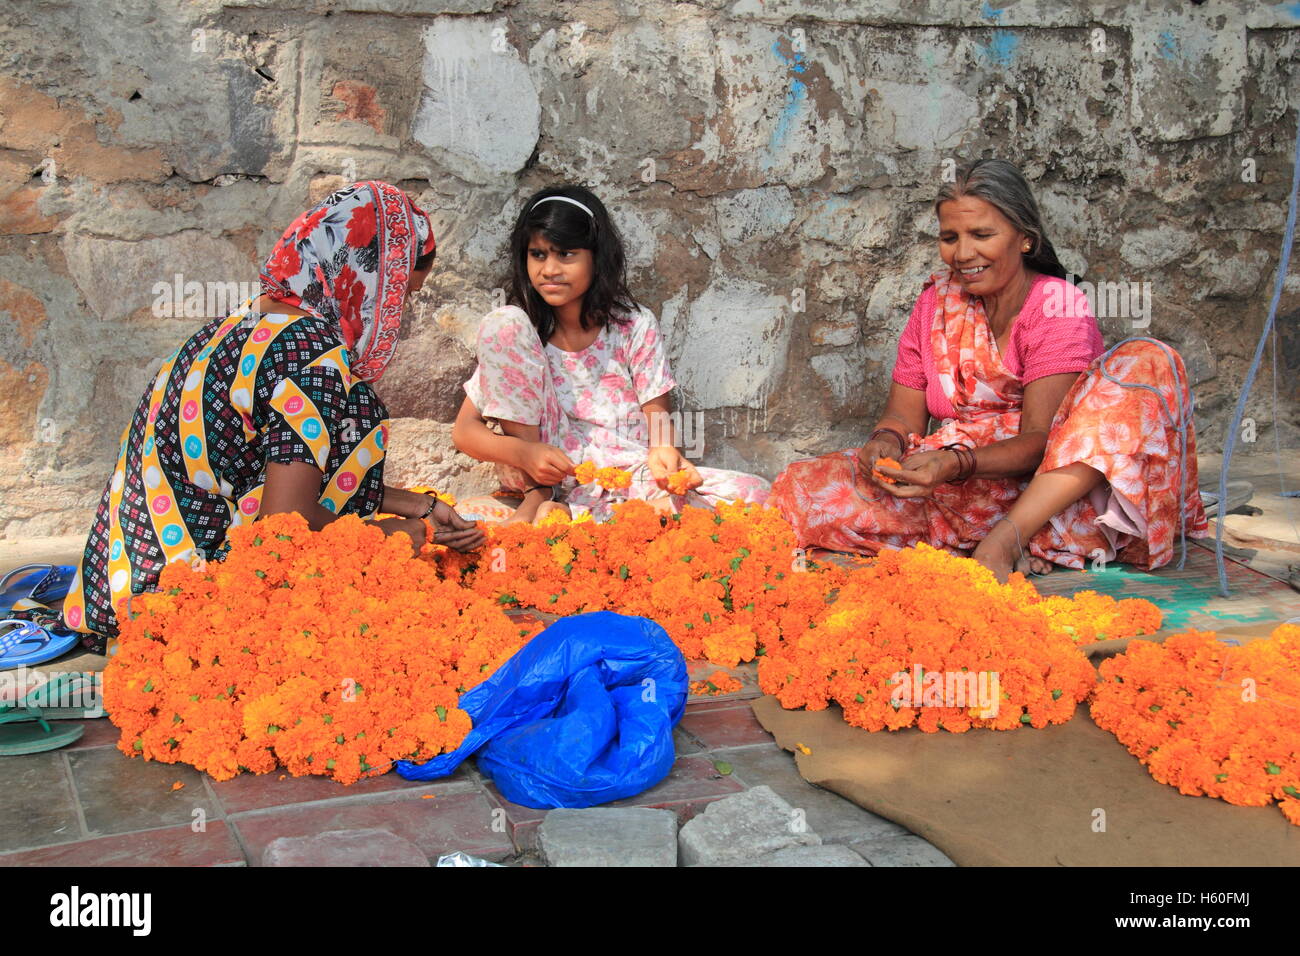 Preparing Marigold garlands for Diwali, the Hindu Festival of Lights, Delhi, India, Indian subcontinent, South Asia Stock Photo